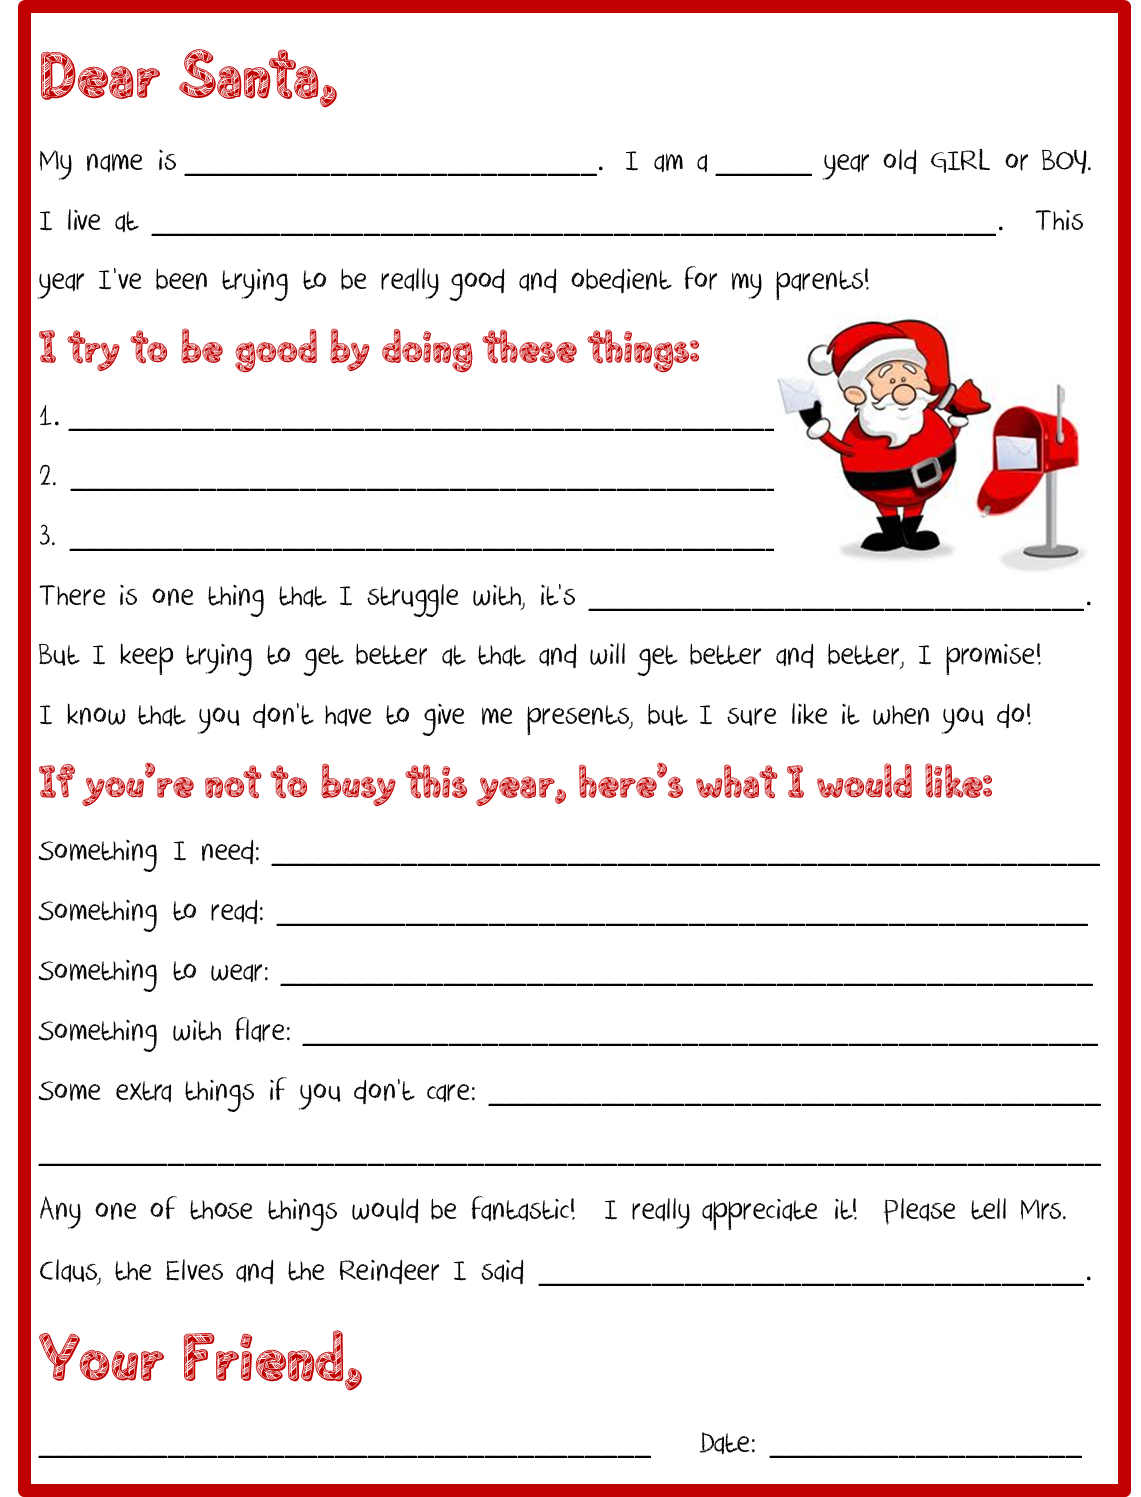 everyday-is-a-hollyday-letter-to-santa